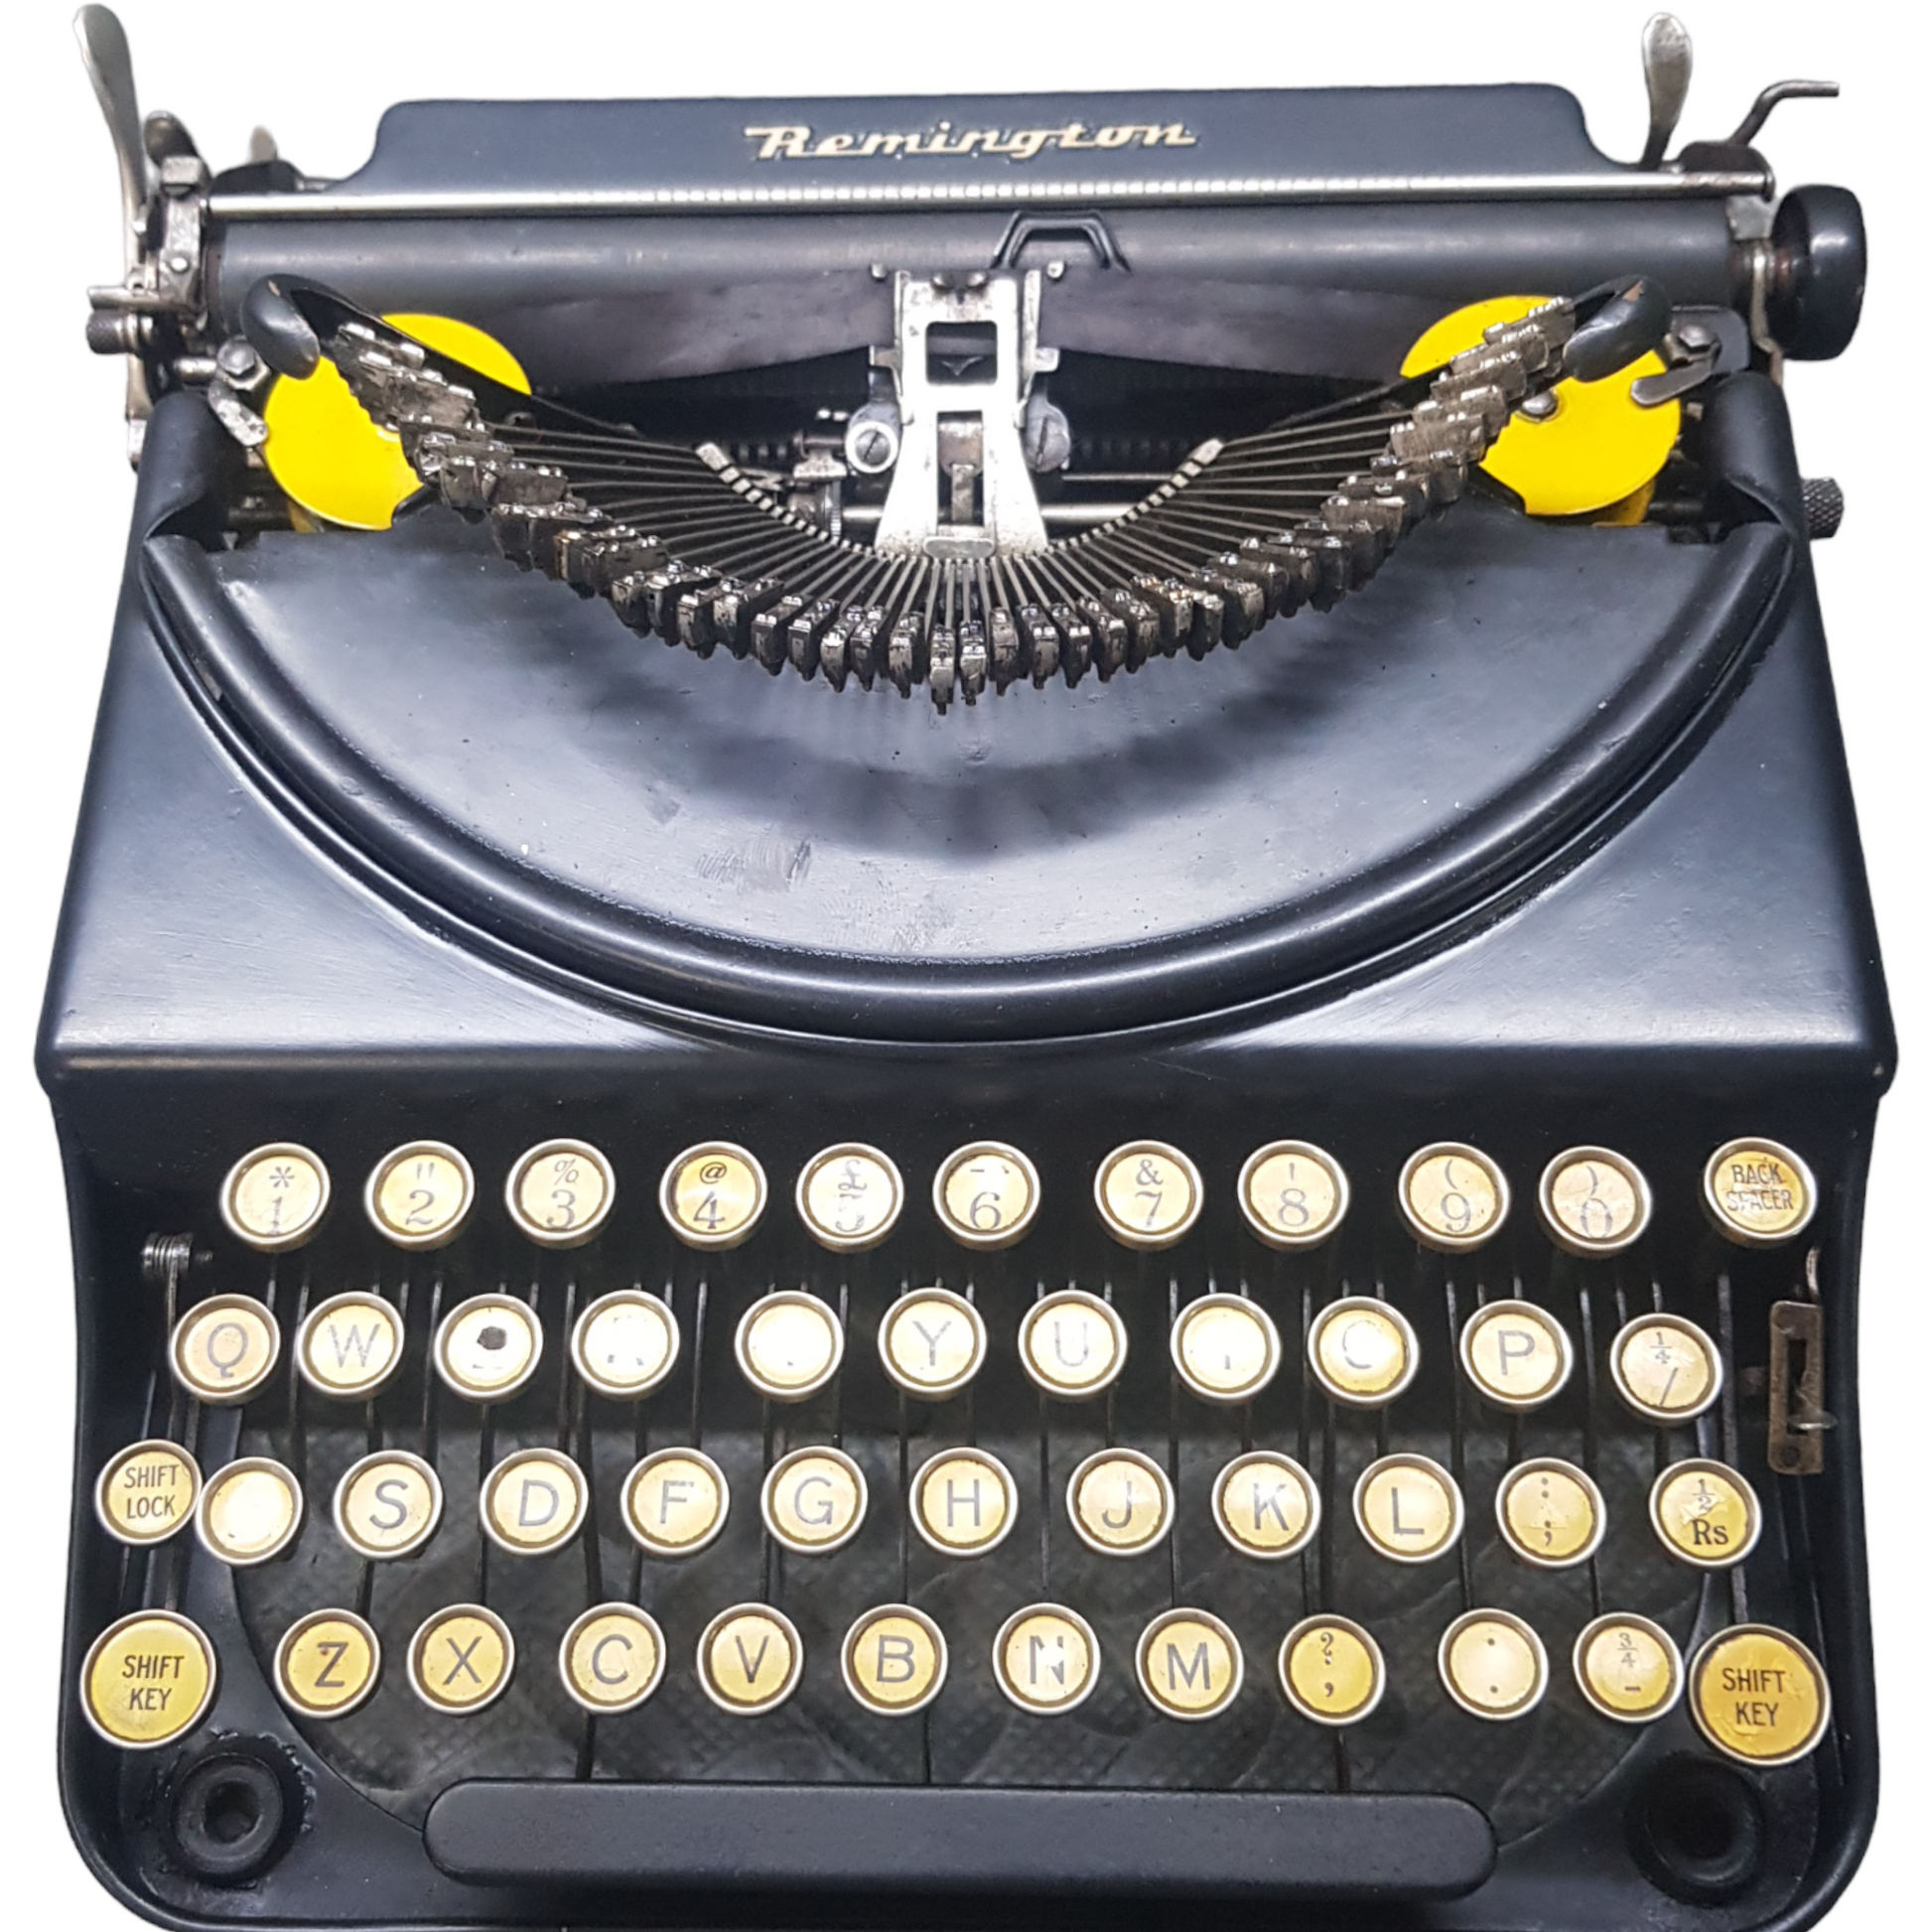 Image of Remington Mode 2 Lifting Typewriter. A Rare Antique Century old Metal Keyring Portable Typewriter. Made in the USA. Available from Universal Typewriter Company.